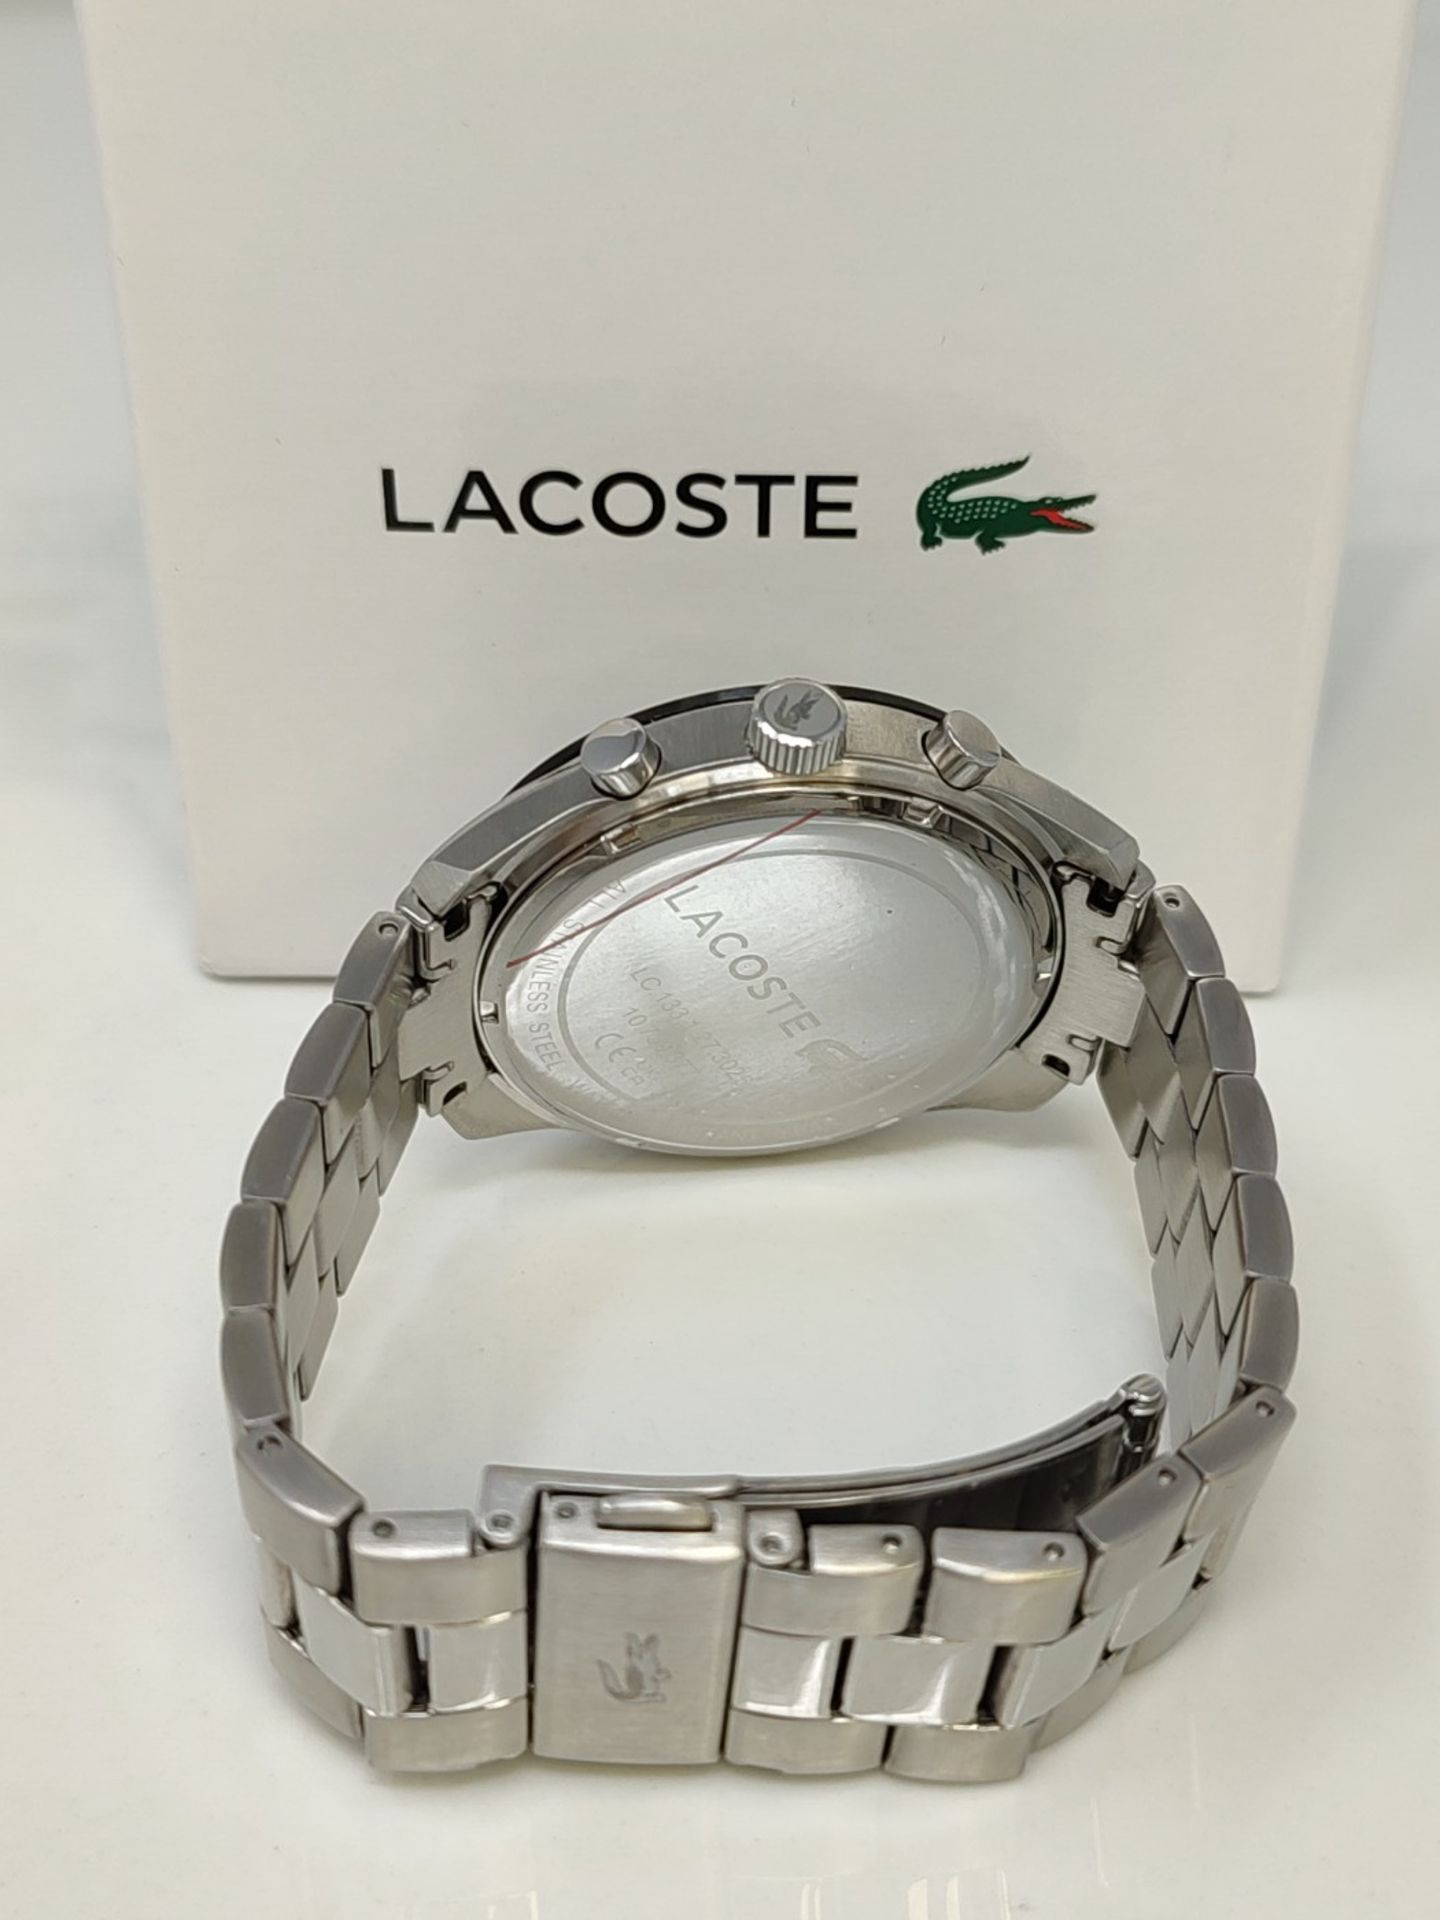 RRP £152.00 Lacoste Quartz Chronograph Watch for Men with Silver Stainless Steel Bracelet - 201107 - Image 3 of 3